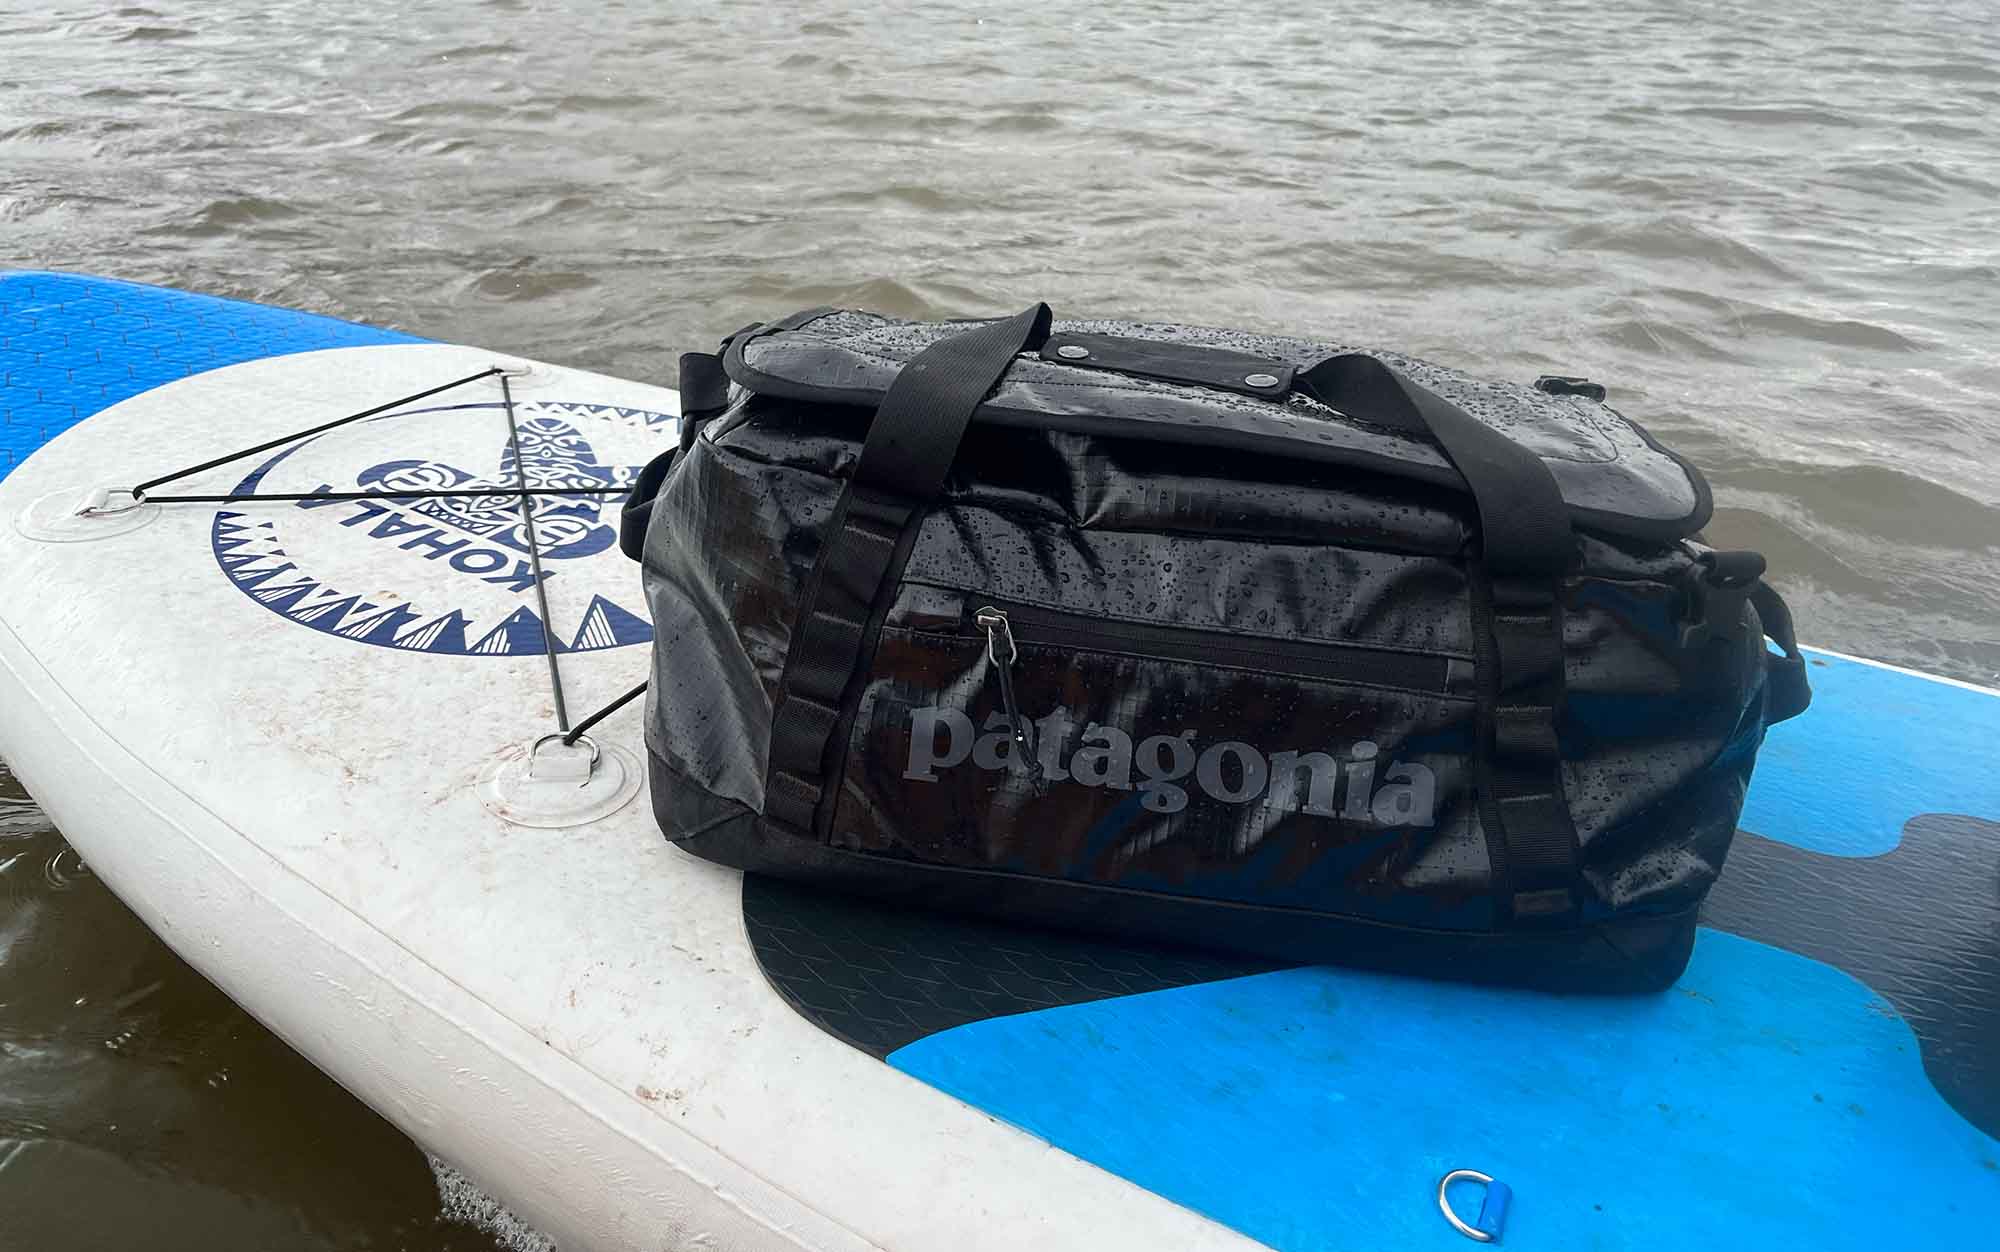 The Black Hole duffle sits on a paddleboard.